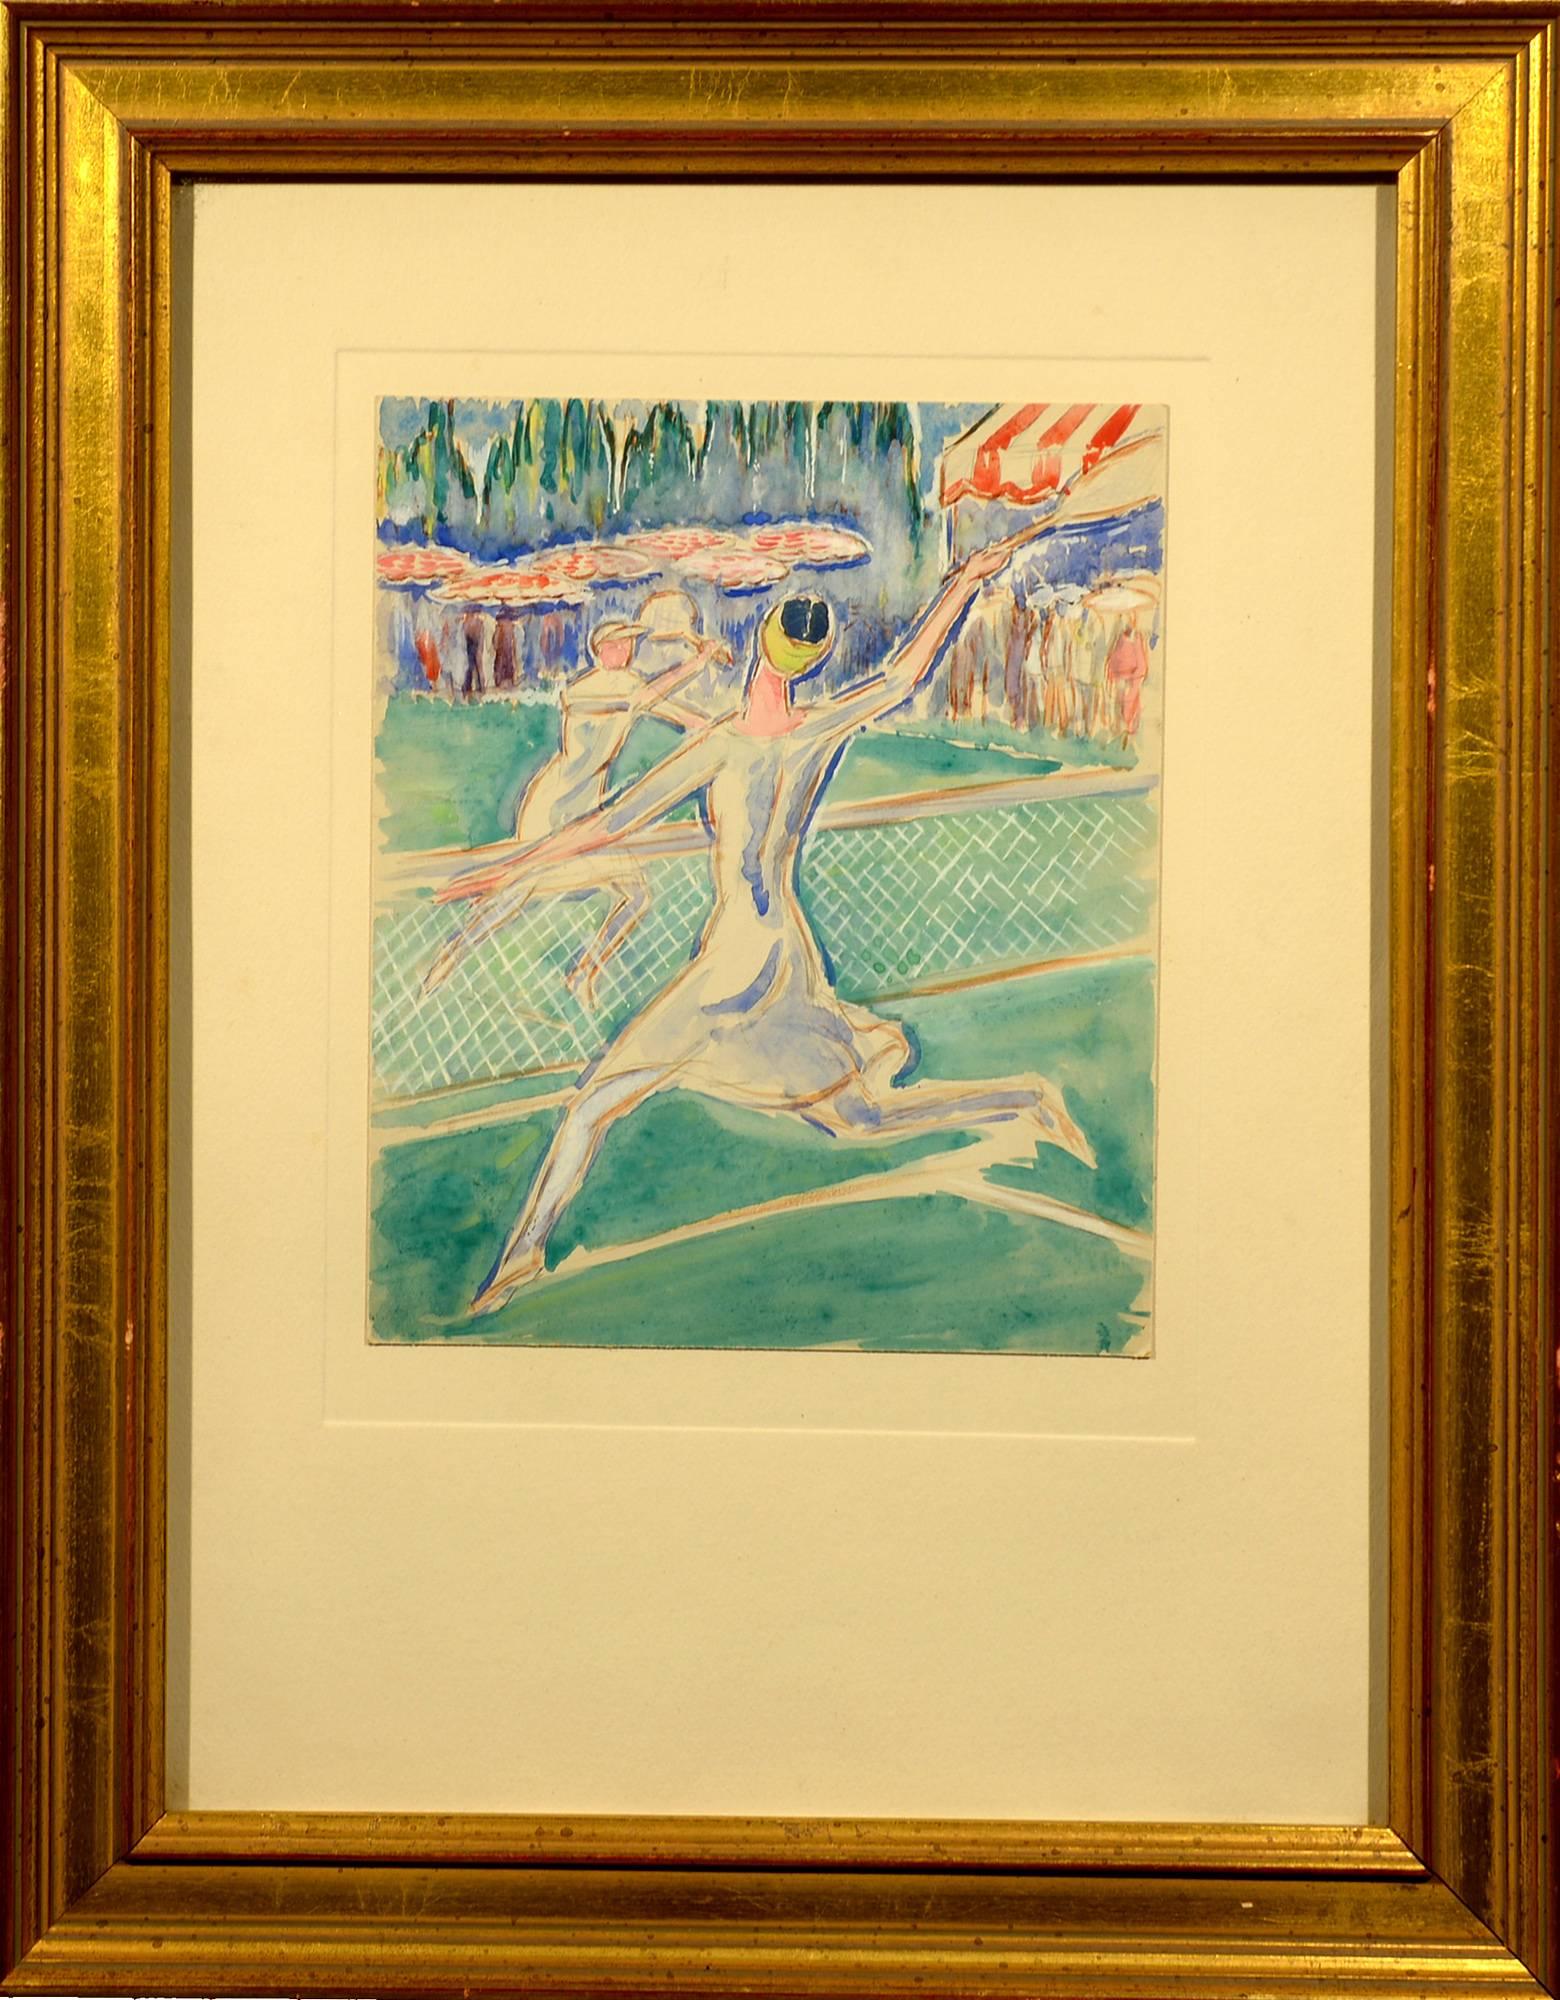 A Game of Tennis - Painting by Rufus Dryer